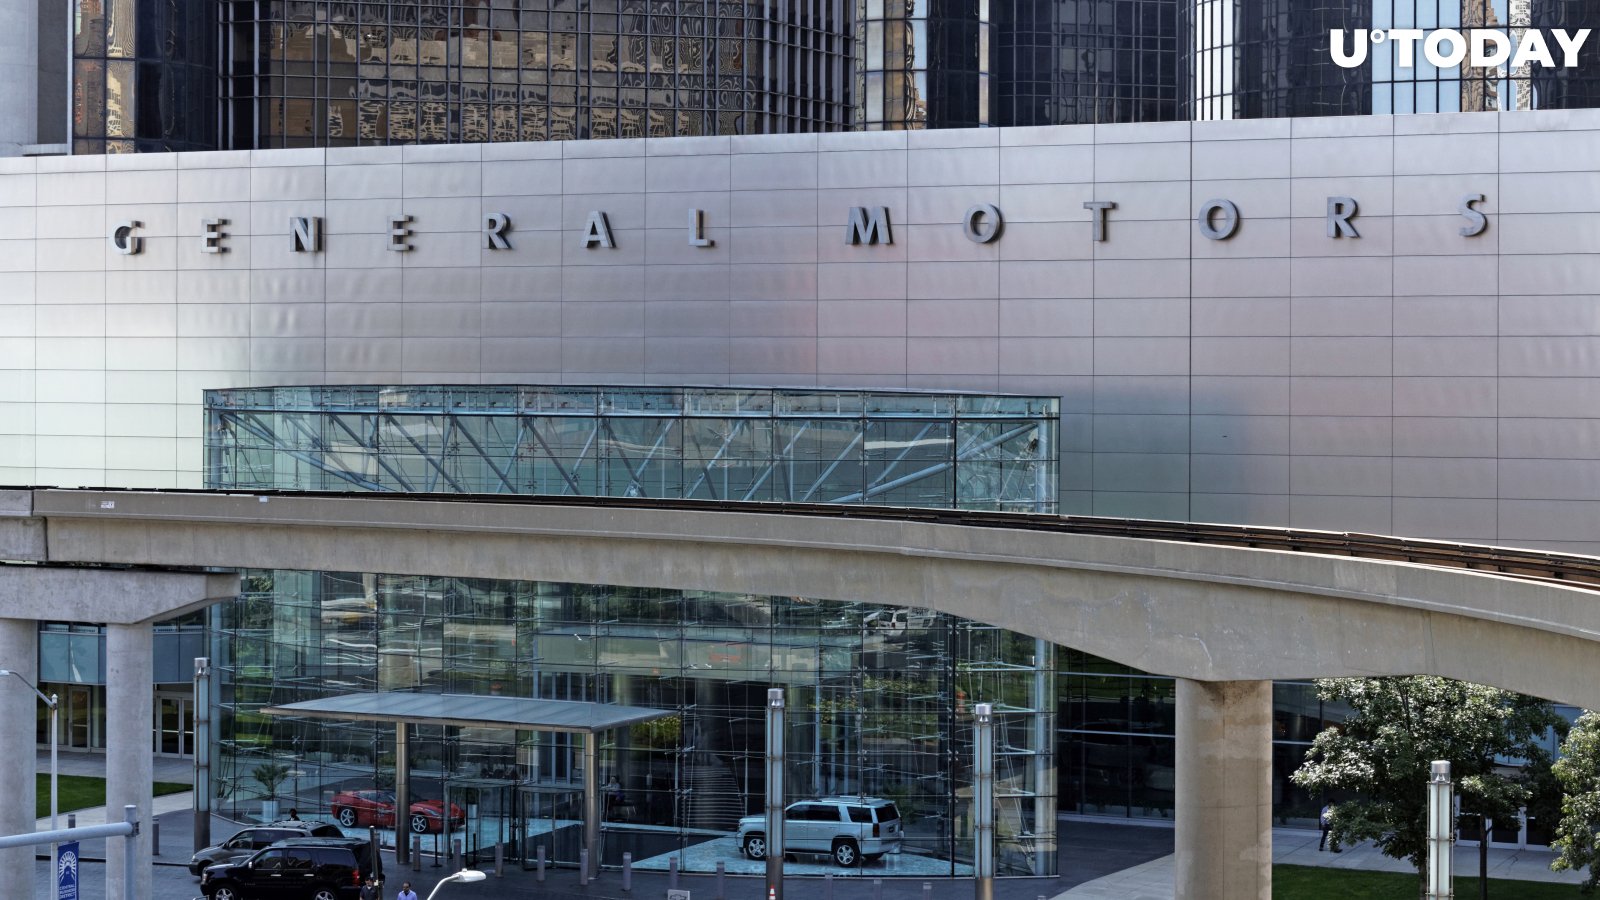 General Motors May Start Accepting Bitcoin If There's Customer Demand, Says CEO Mary Barra   